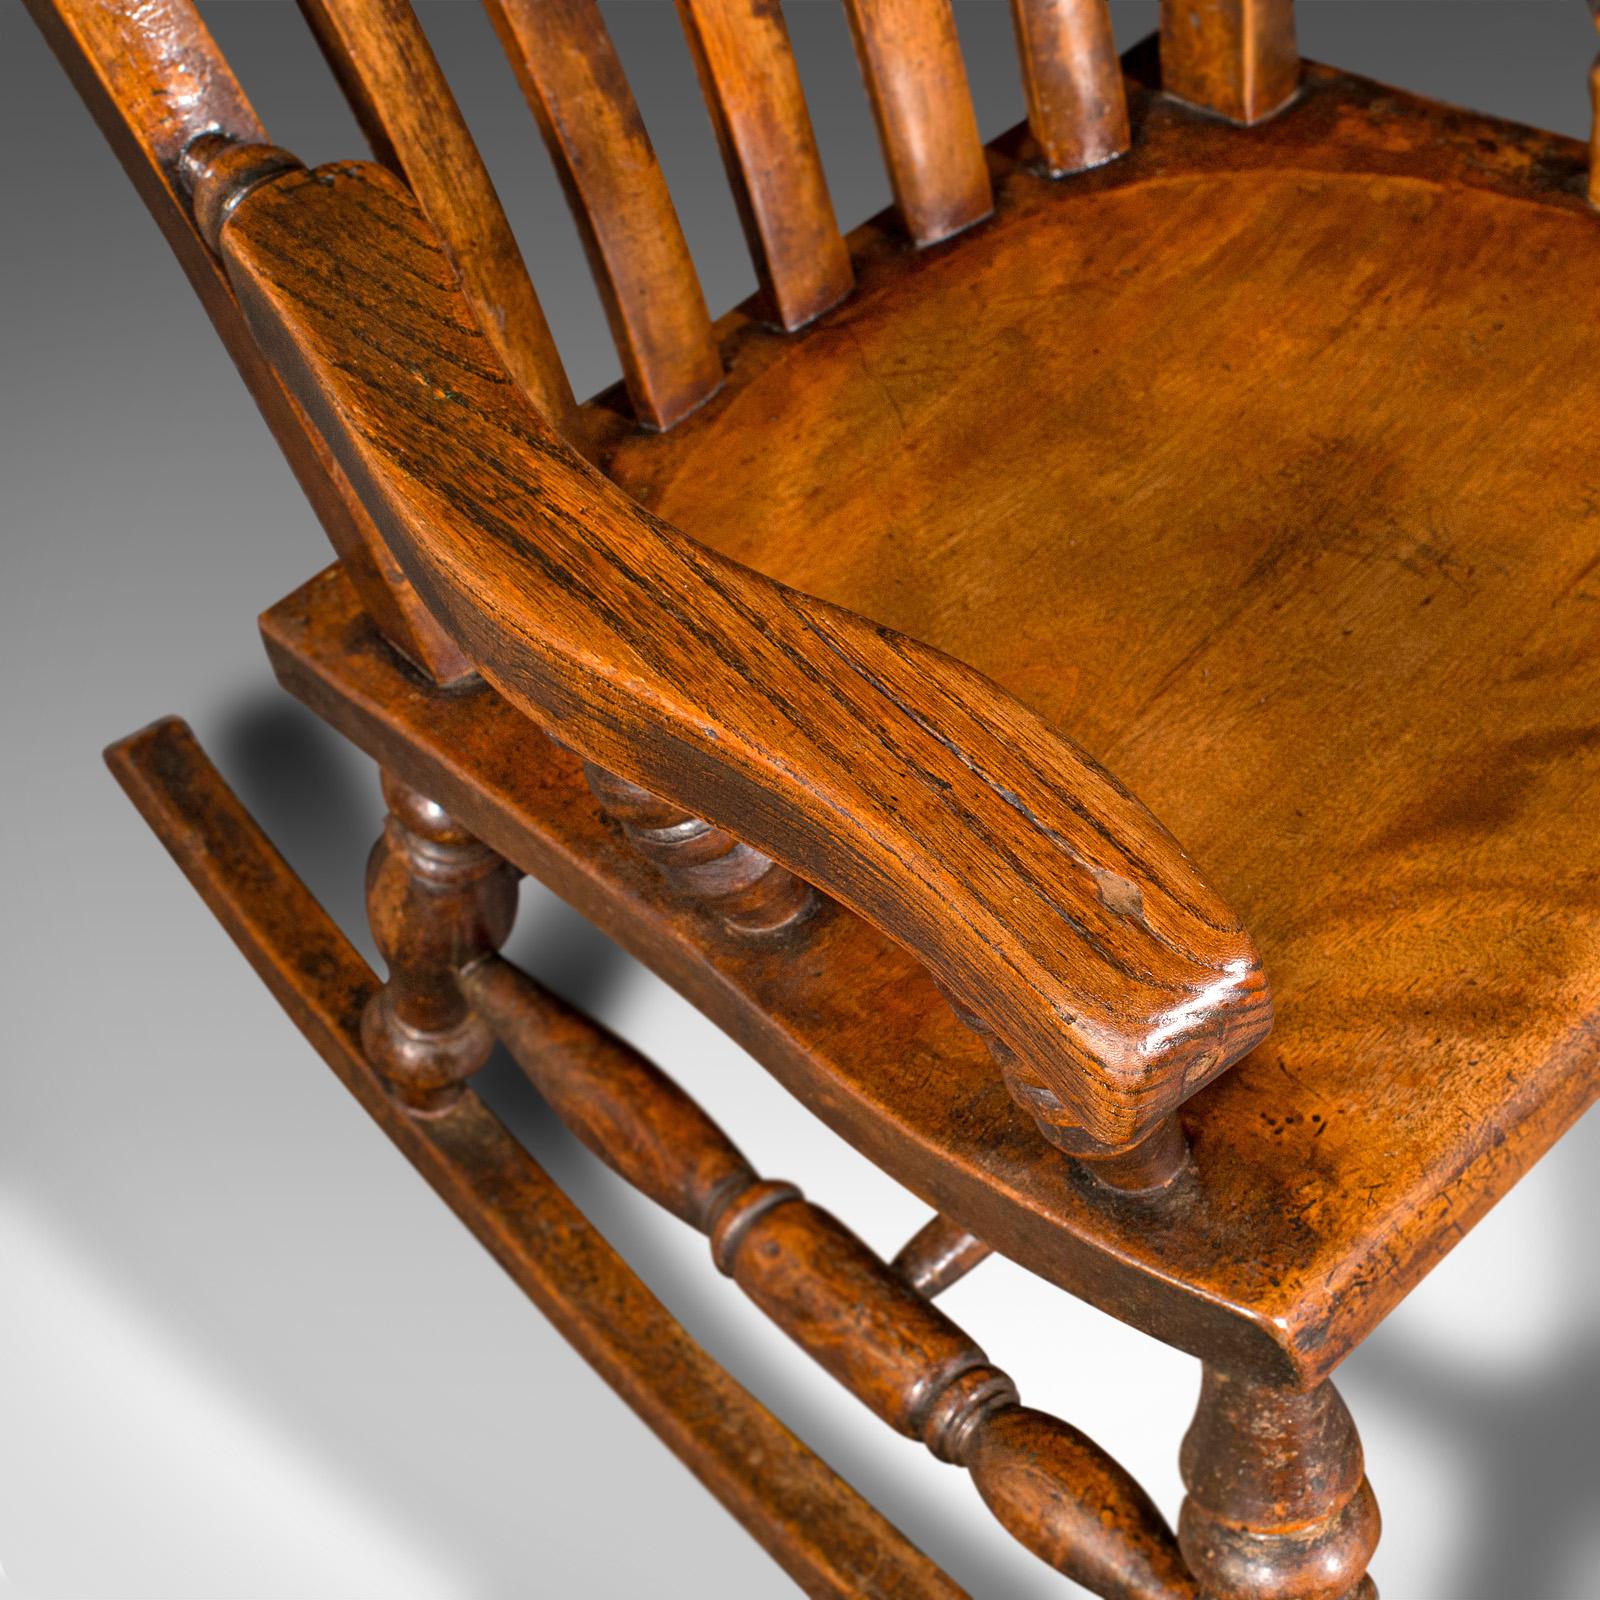 Antique Lath Back Rocking Chair, English Elm, Beech, Elbow Seat, Victorian, 1880 For Sale 2